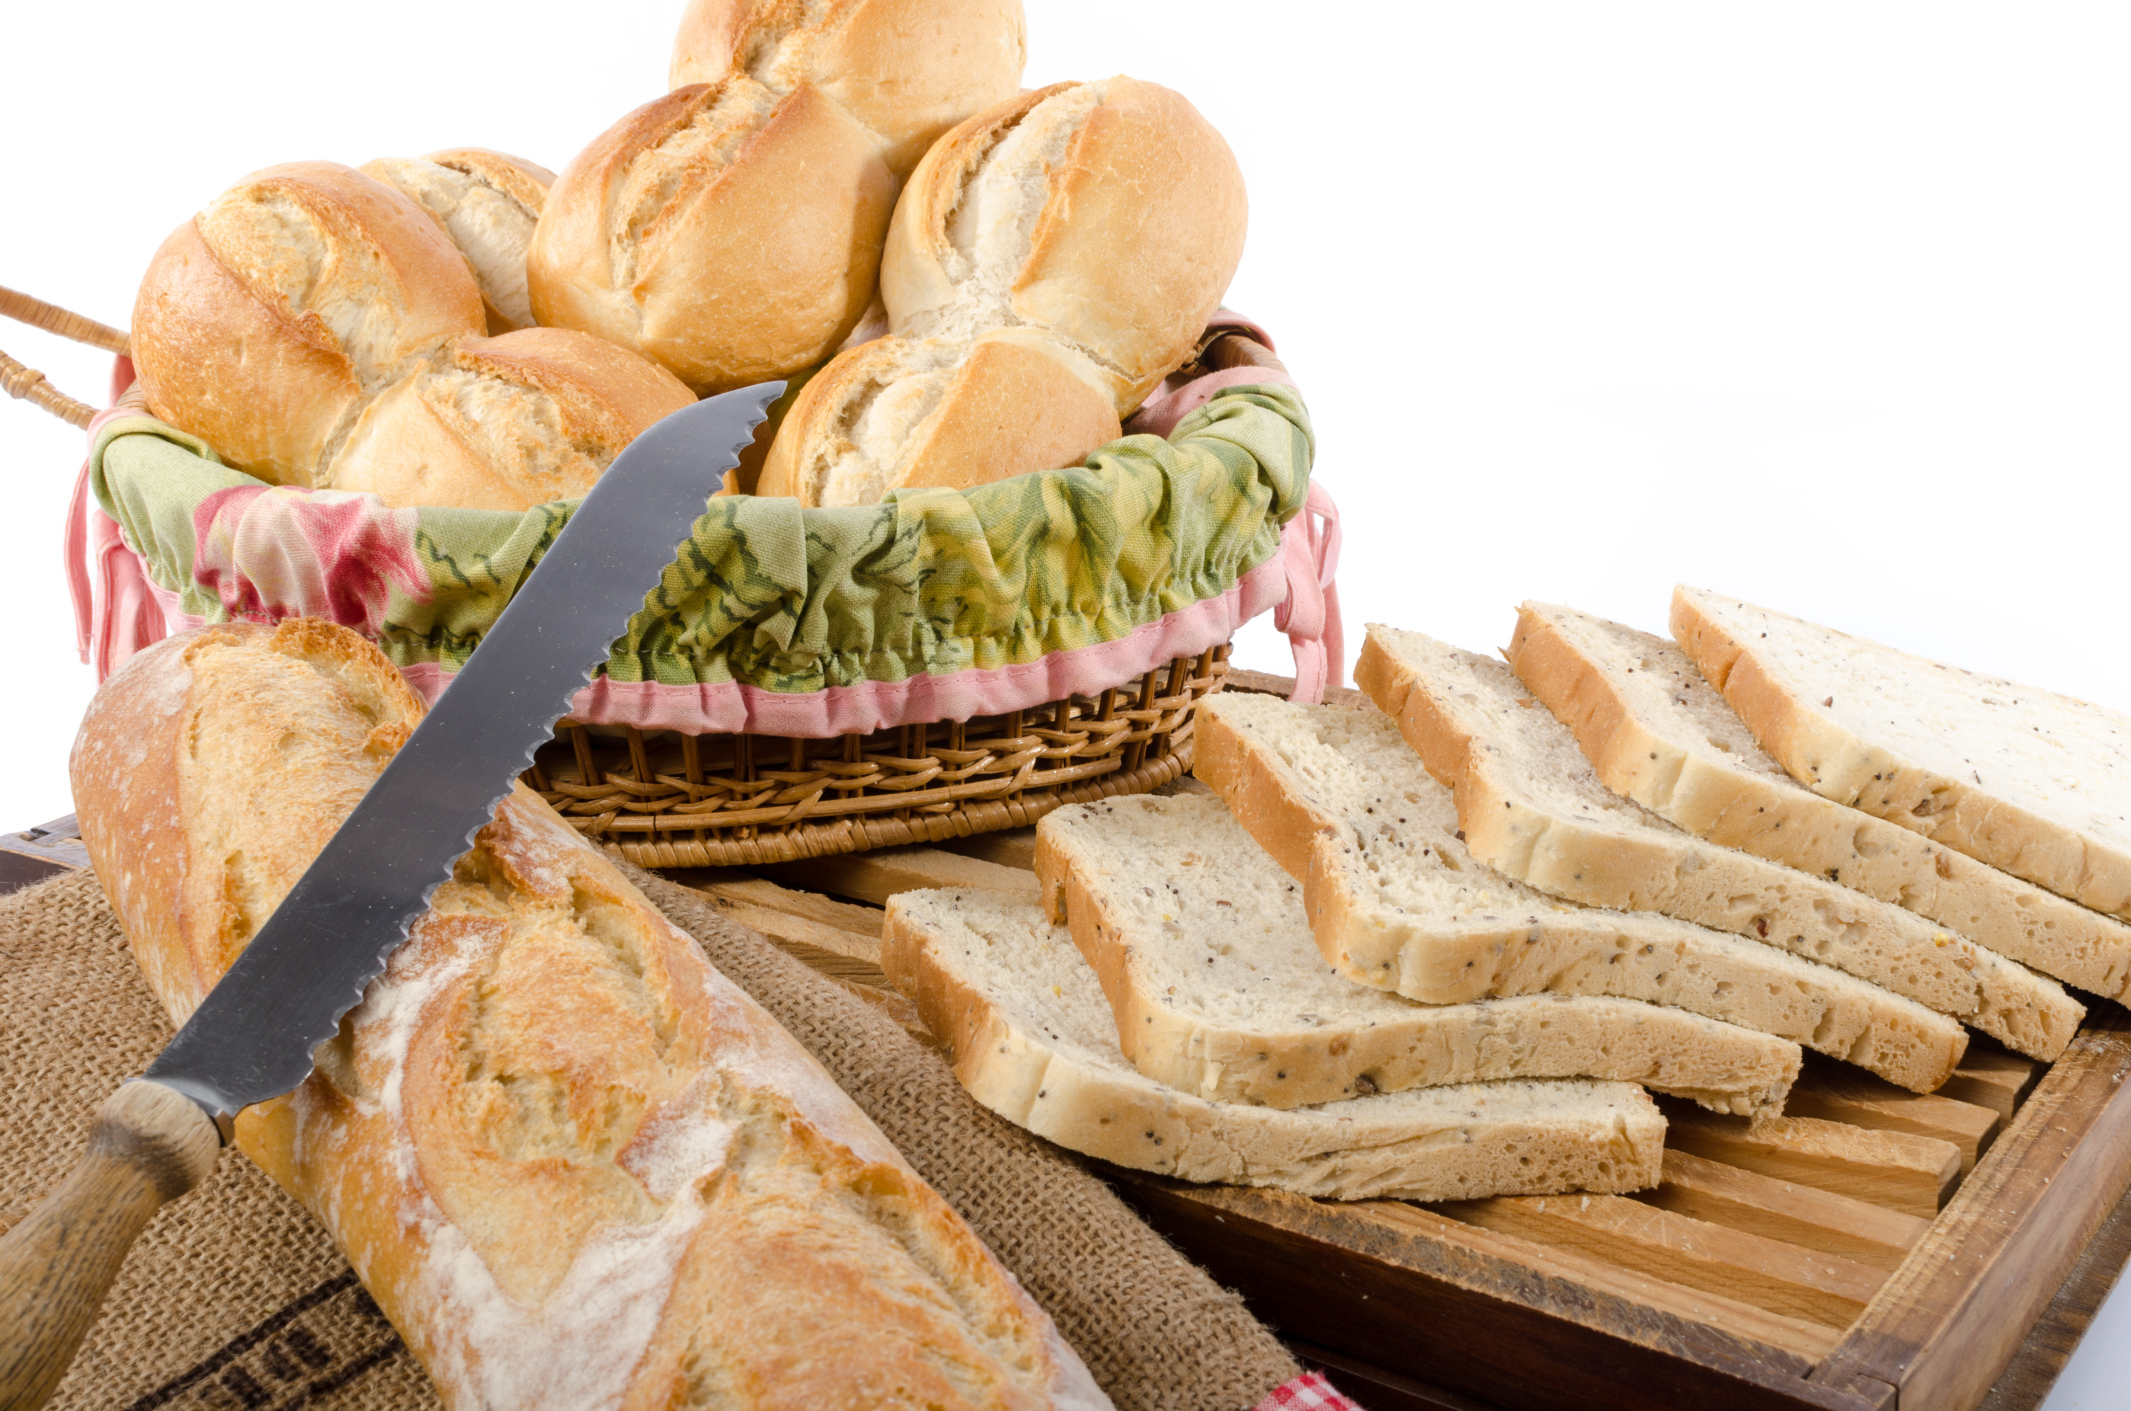 Carbohydrates in Whole Wheat Bread Vs. White Bread | livestrong